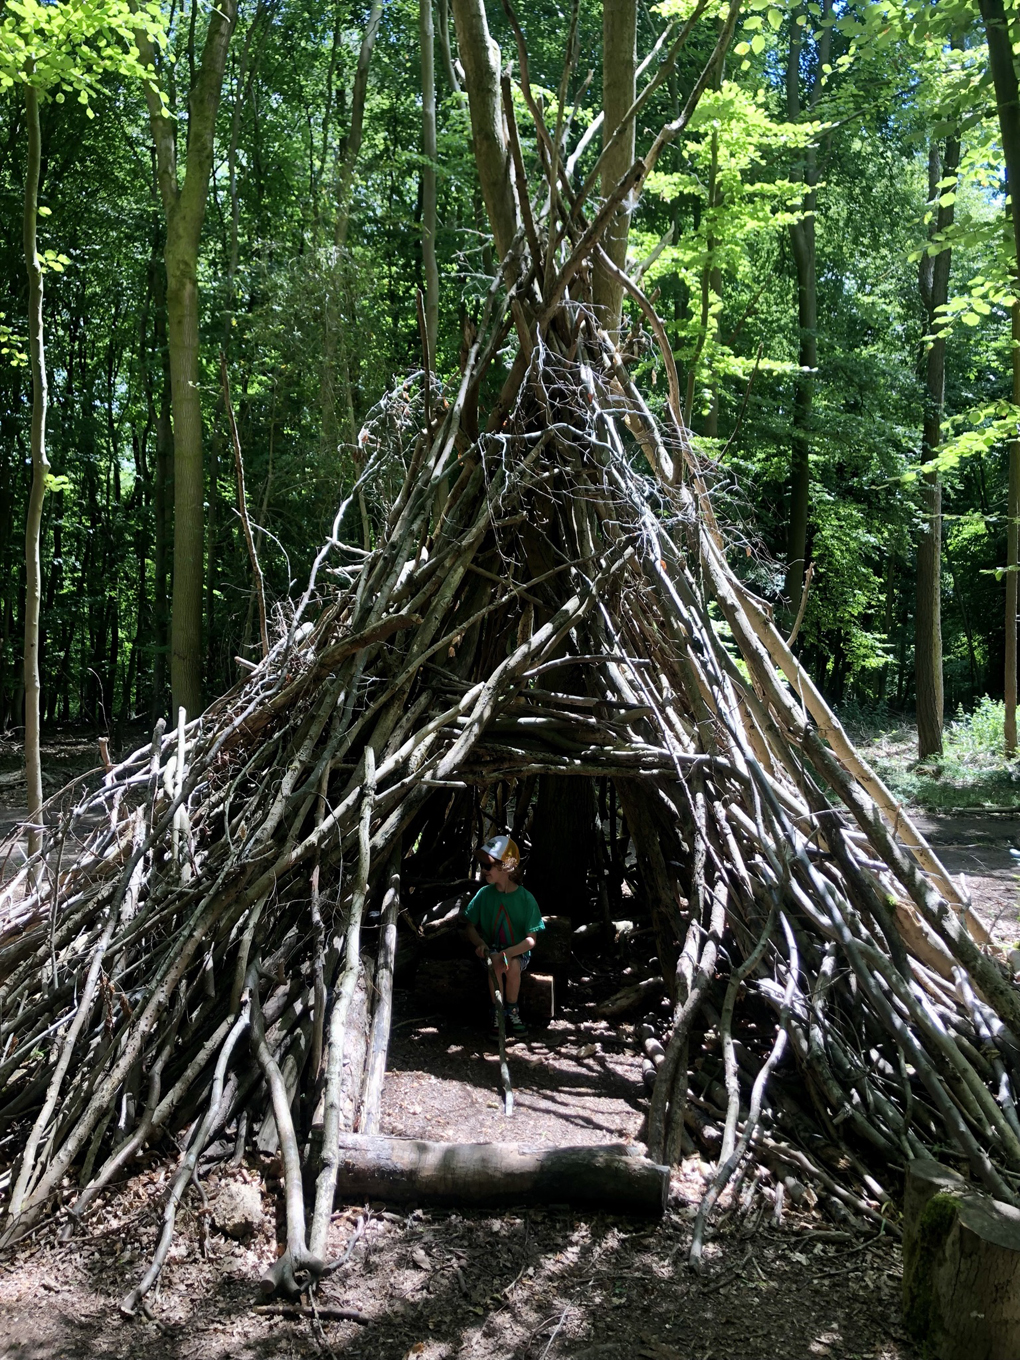 An enormous, teepee-shaped den built from discarded and fallen branches, situated in woodland with dappled light, with a child inside to show off the scale of the build